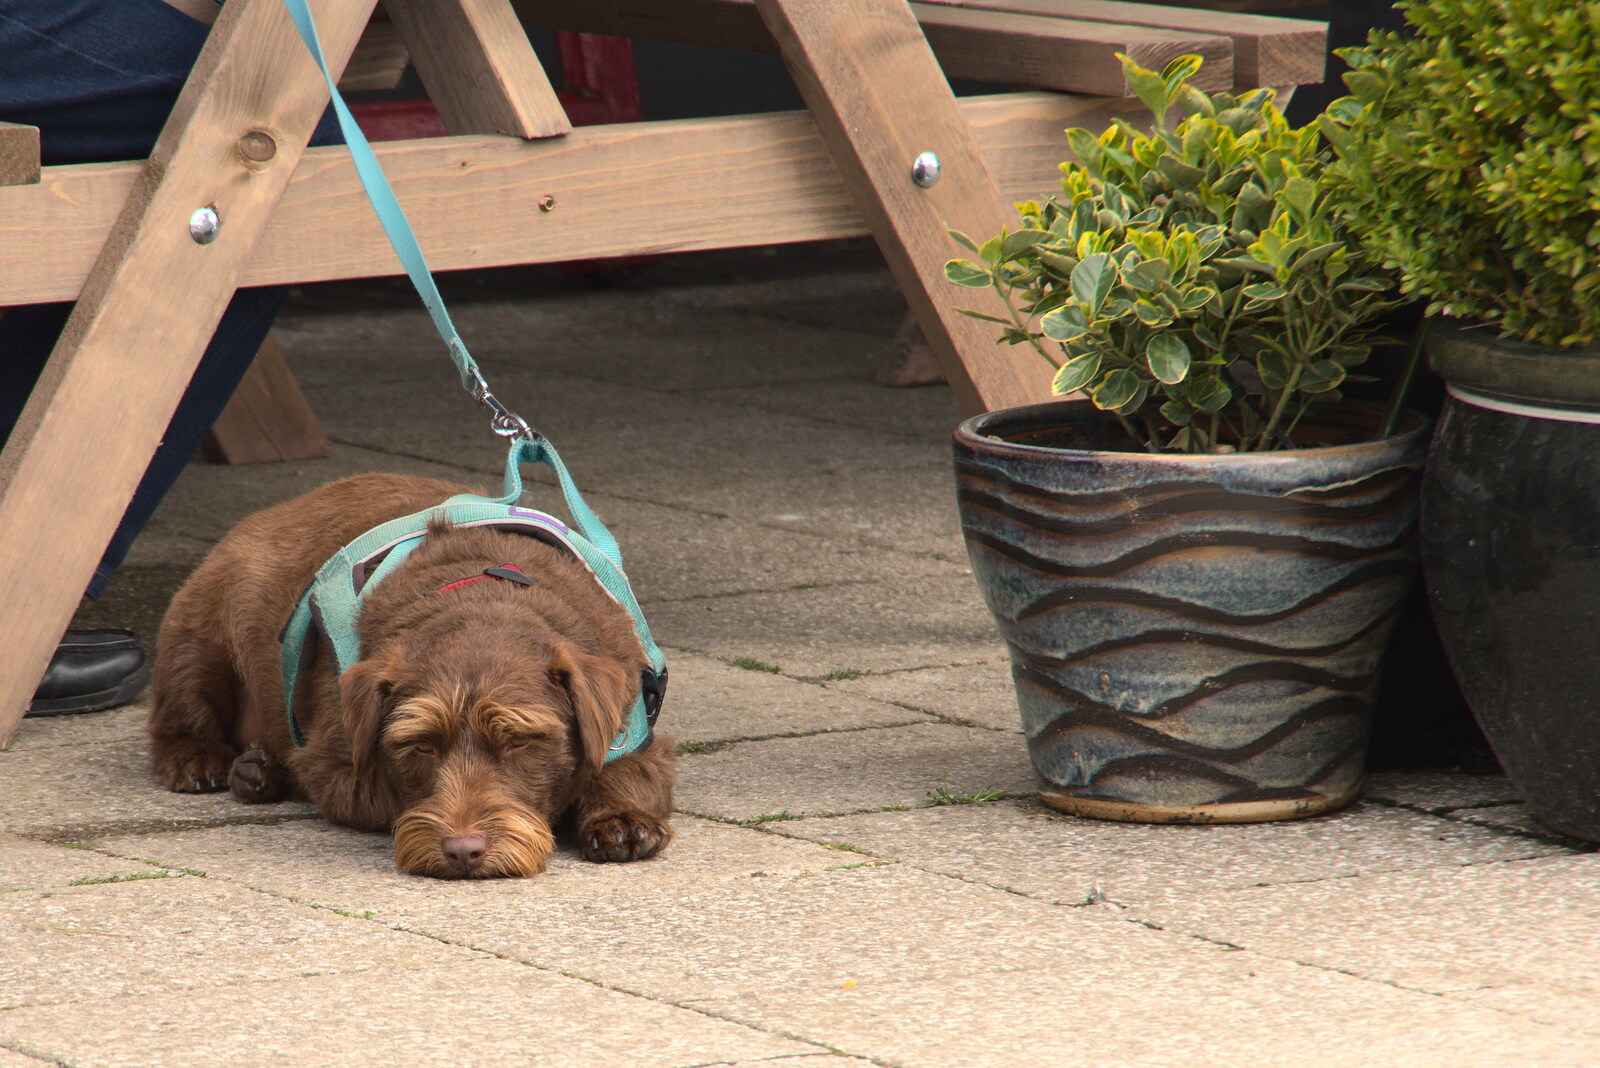 A dog looks very fed up from A Vaccination Afternoon, Swaffham, Norfolk - 9th May 2021